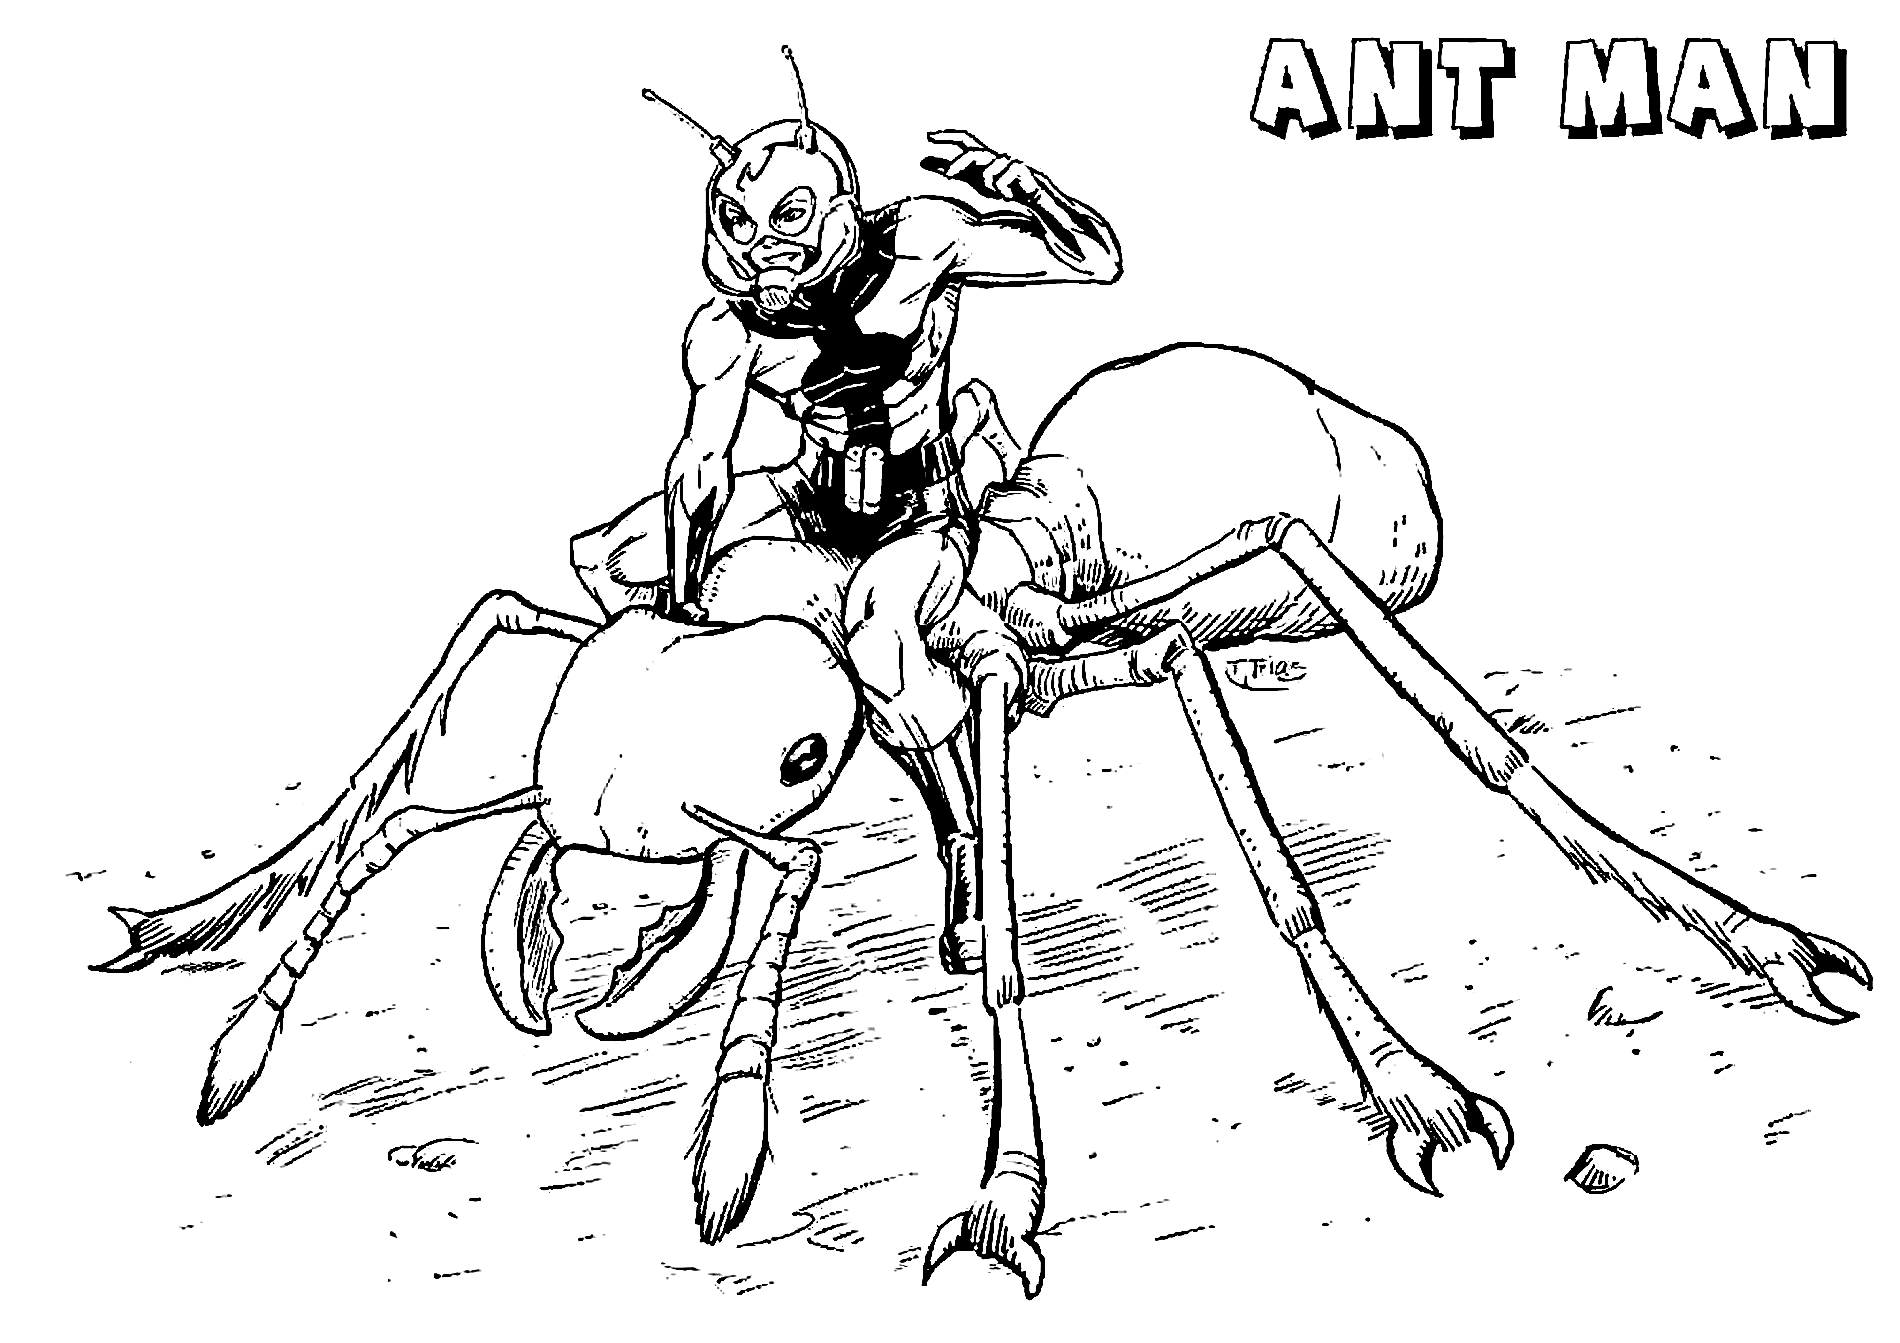 Scott Lang Controls The Ant Details In Ant-man Movie Coloring Page